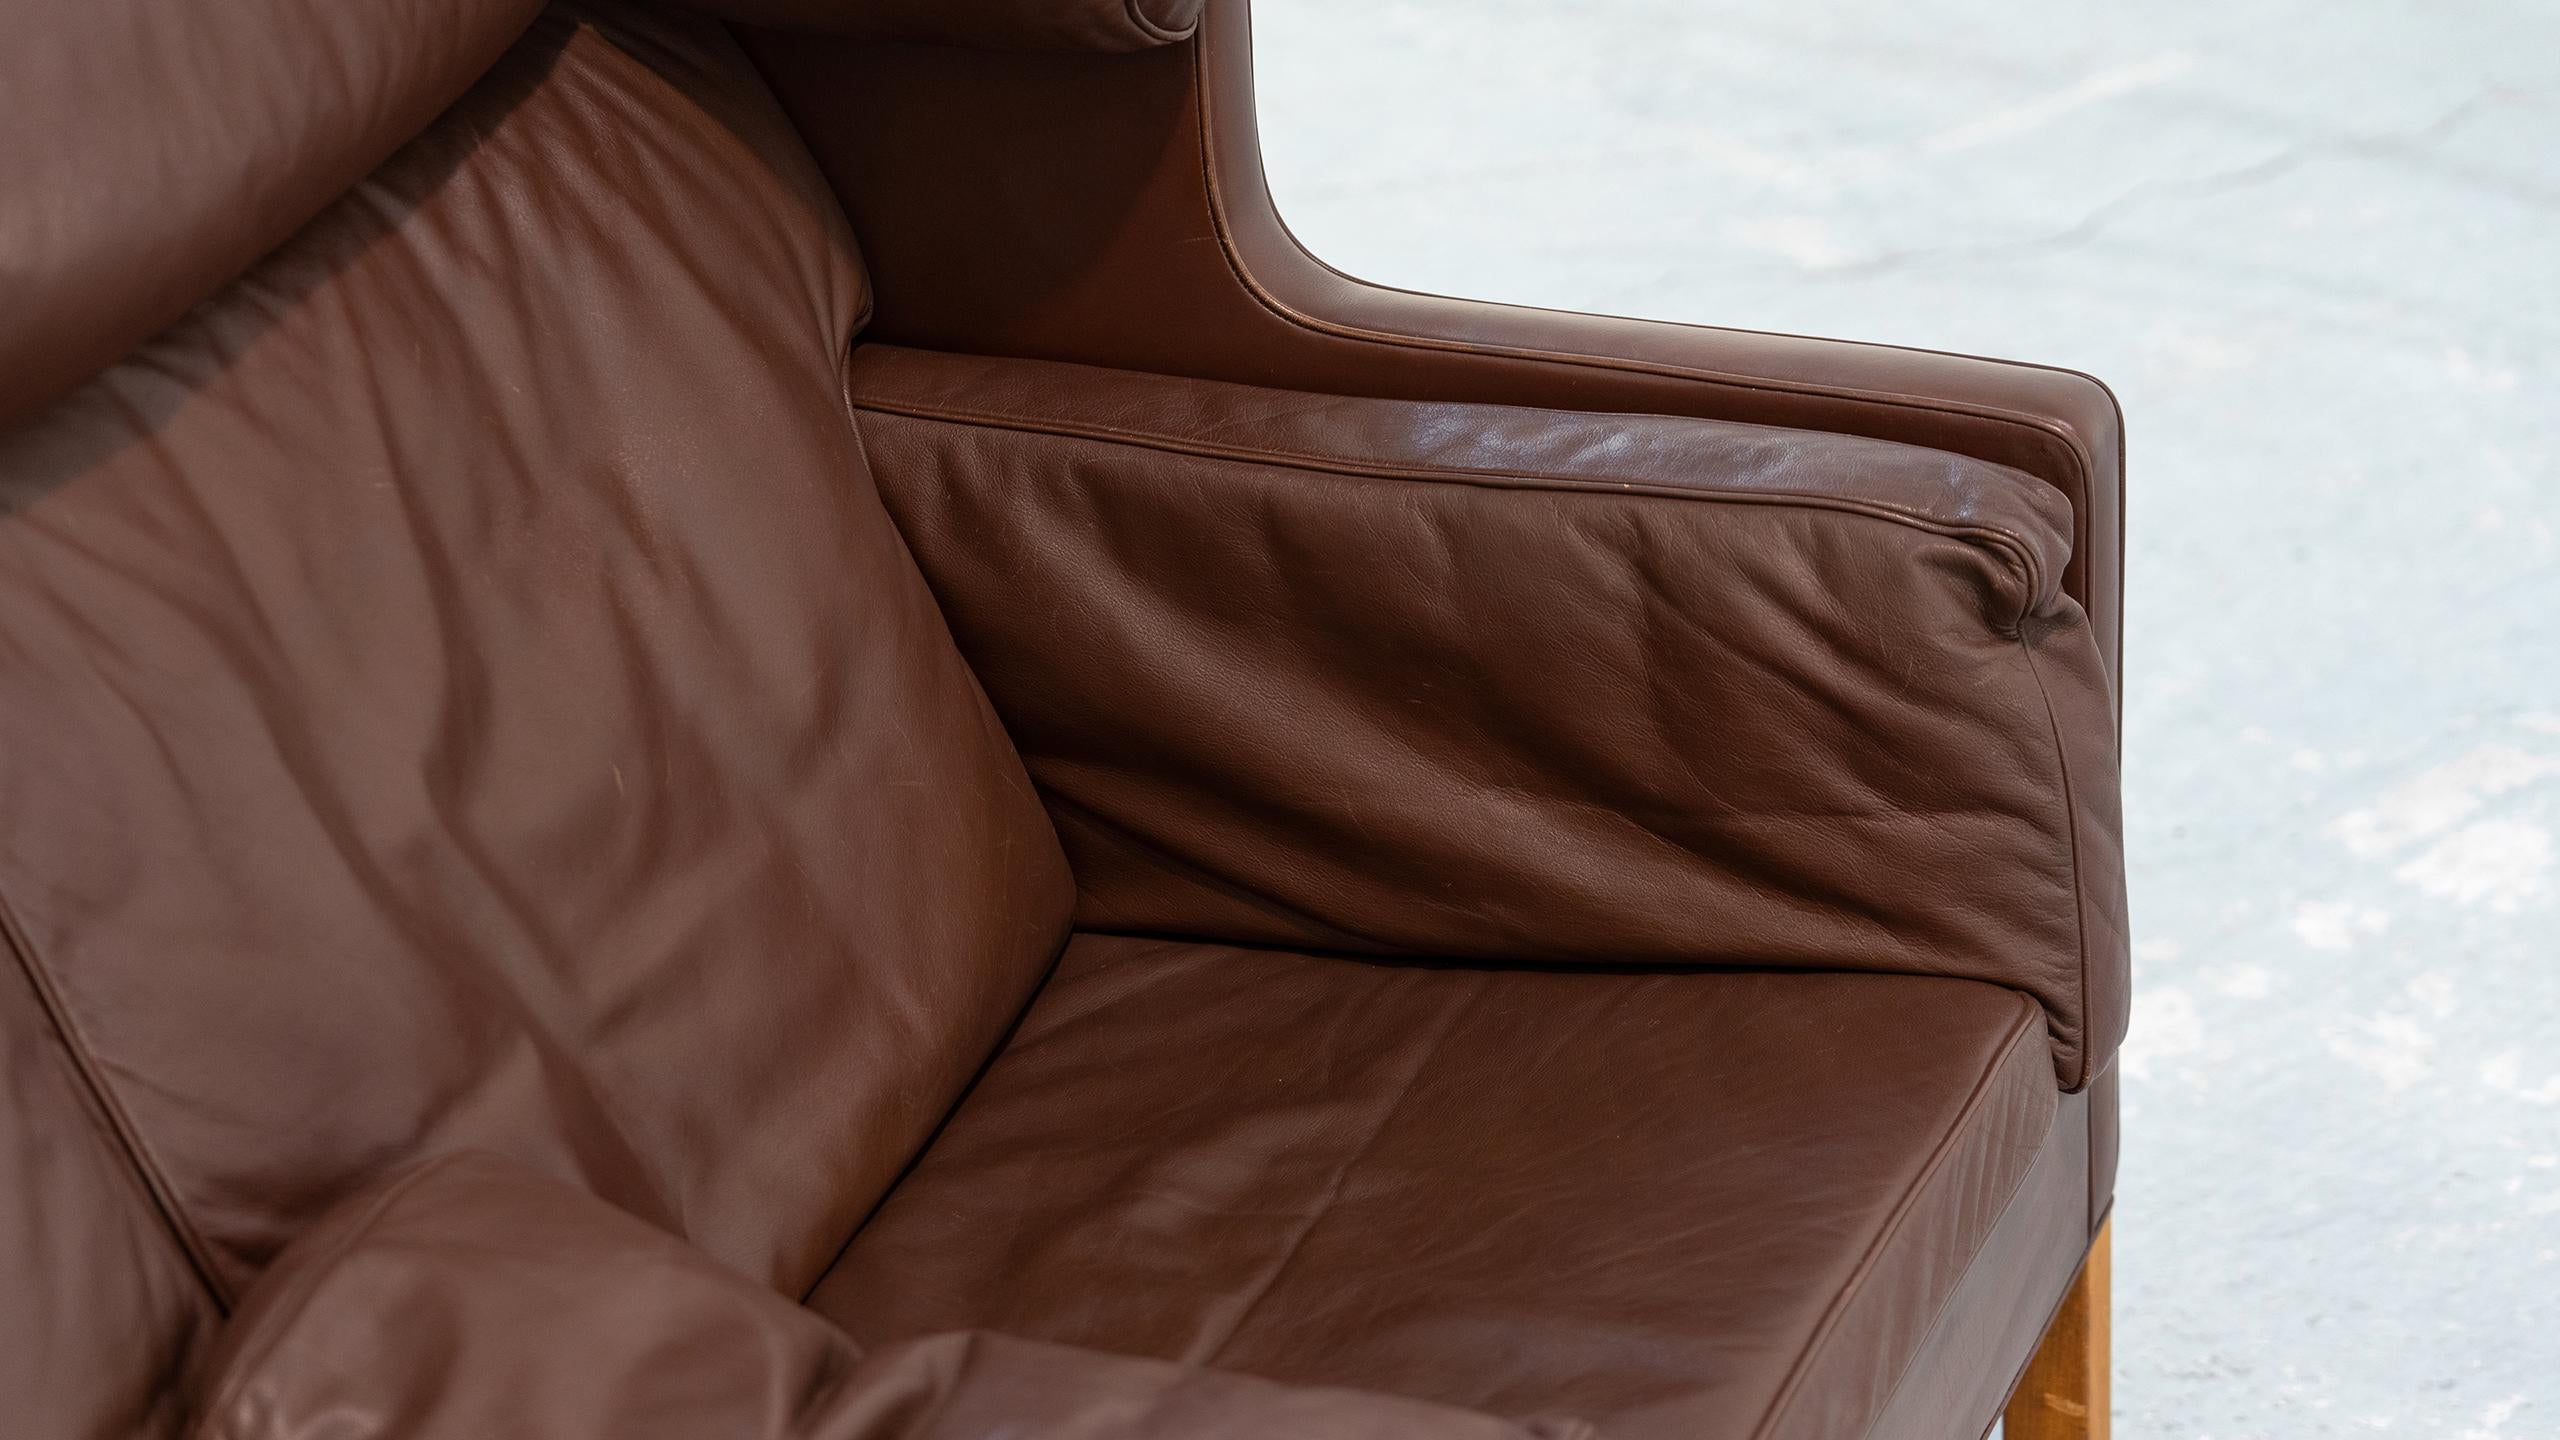 Børge Mogensen, Coupé Sofa in Chocolate Leather, 1971 for Fredericia, Denmark For Sale 8